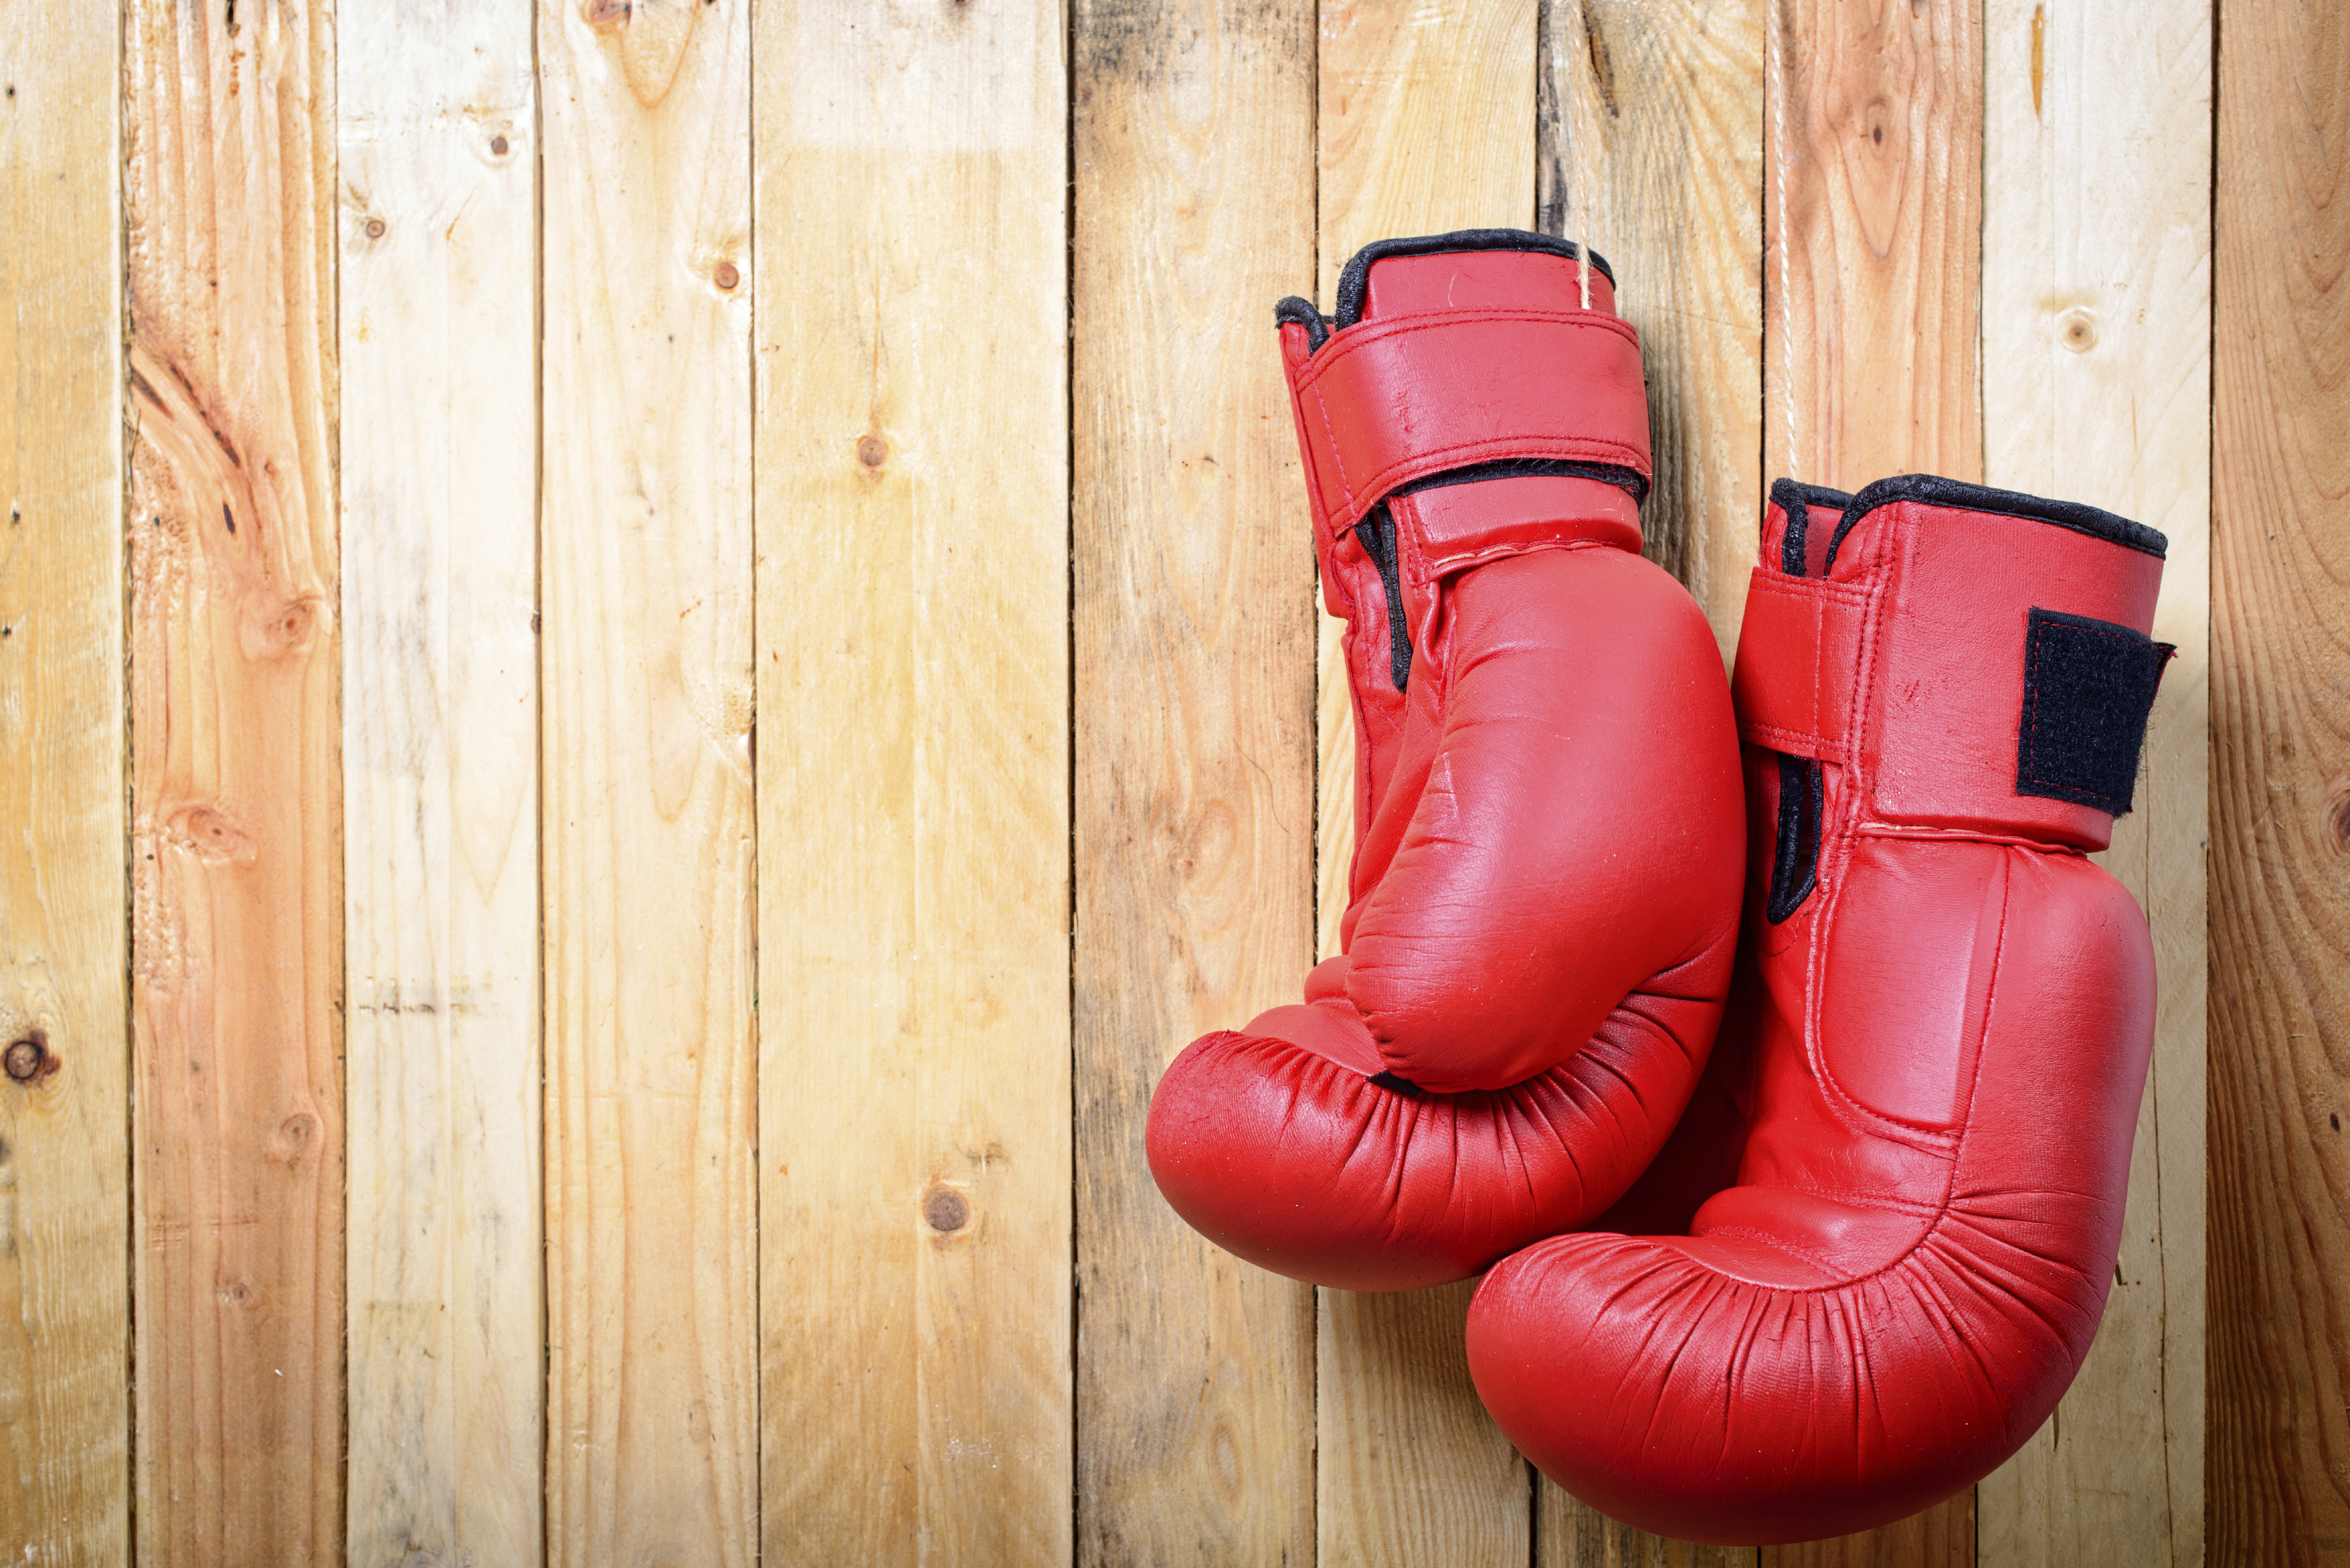 How To Clean Your Kickboxing Gloves